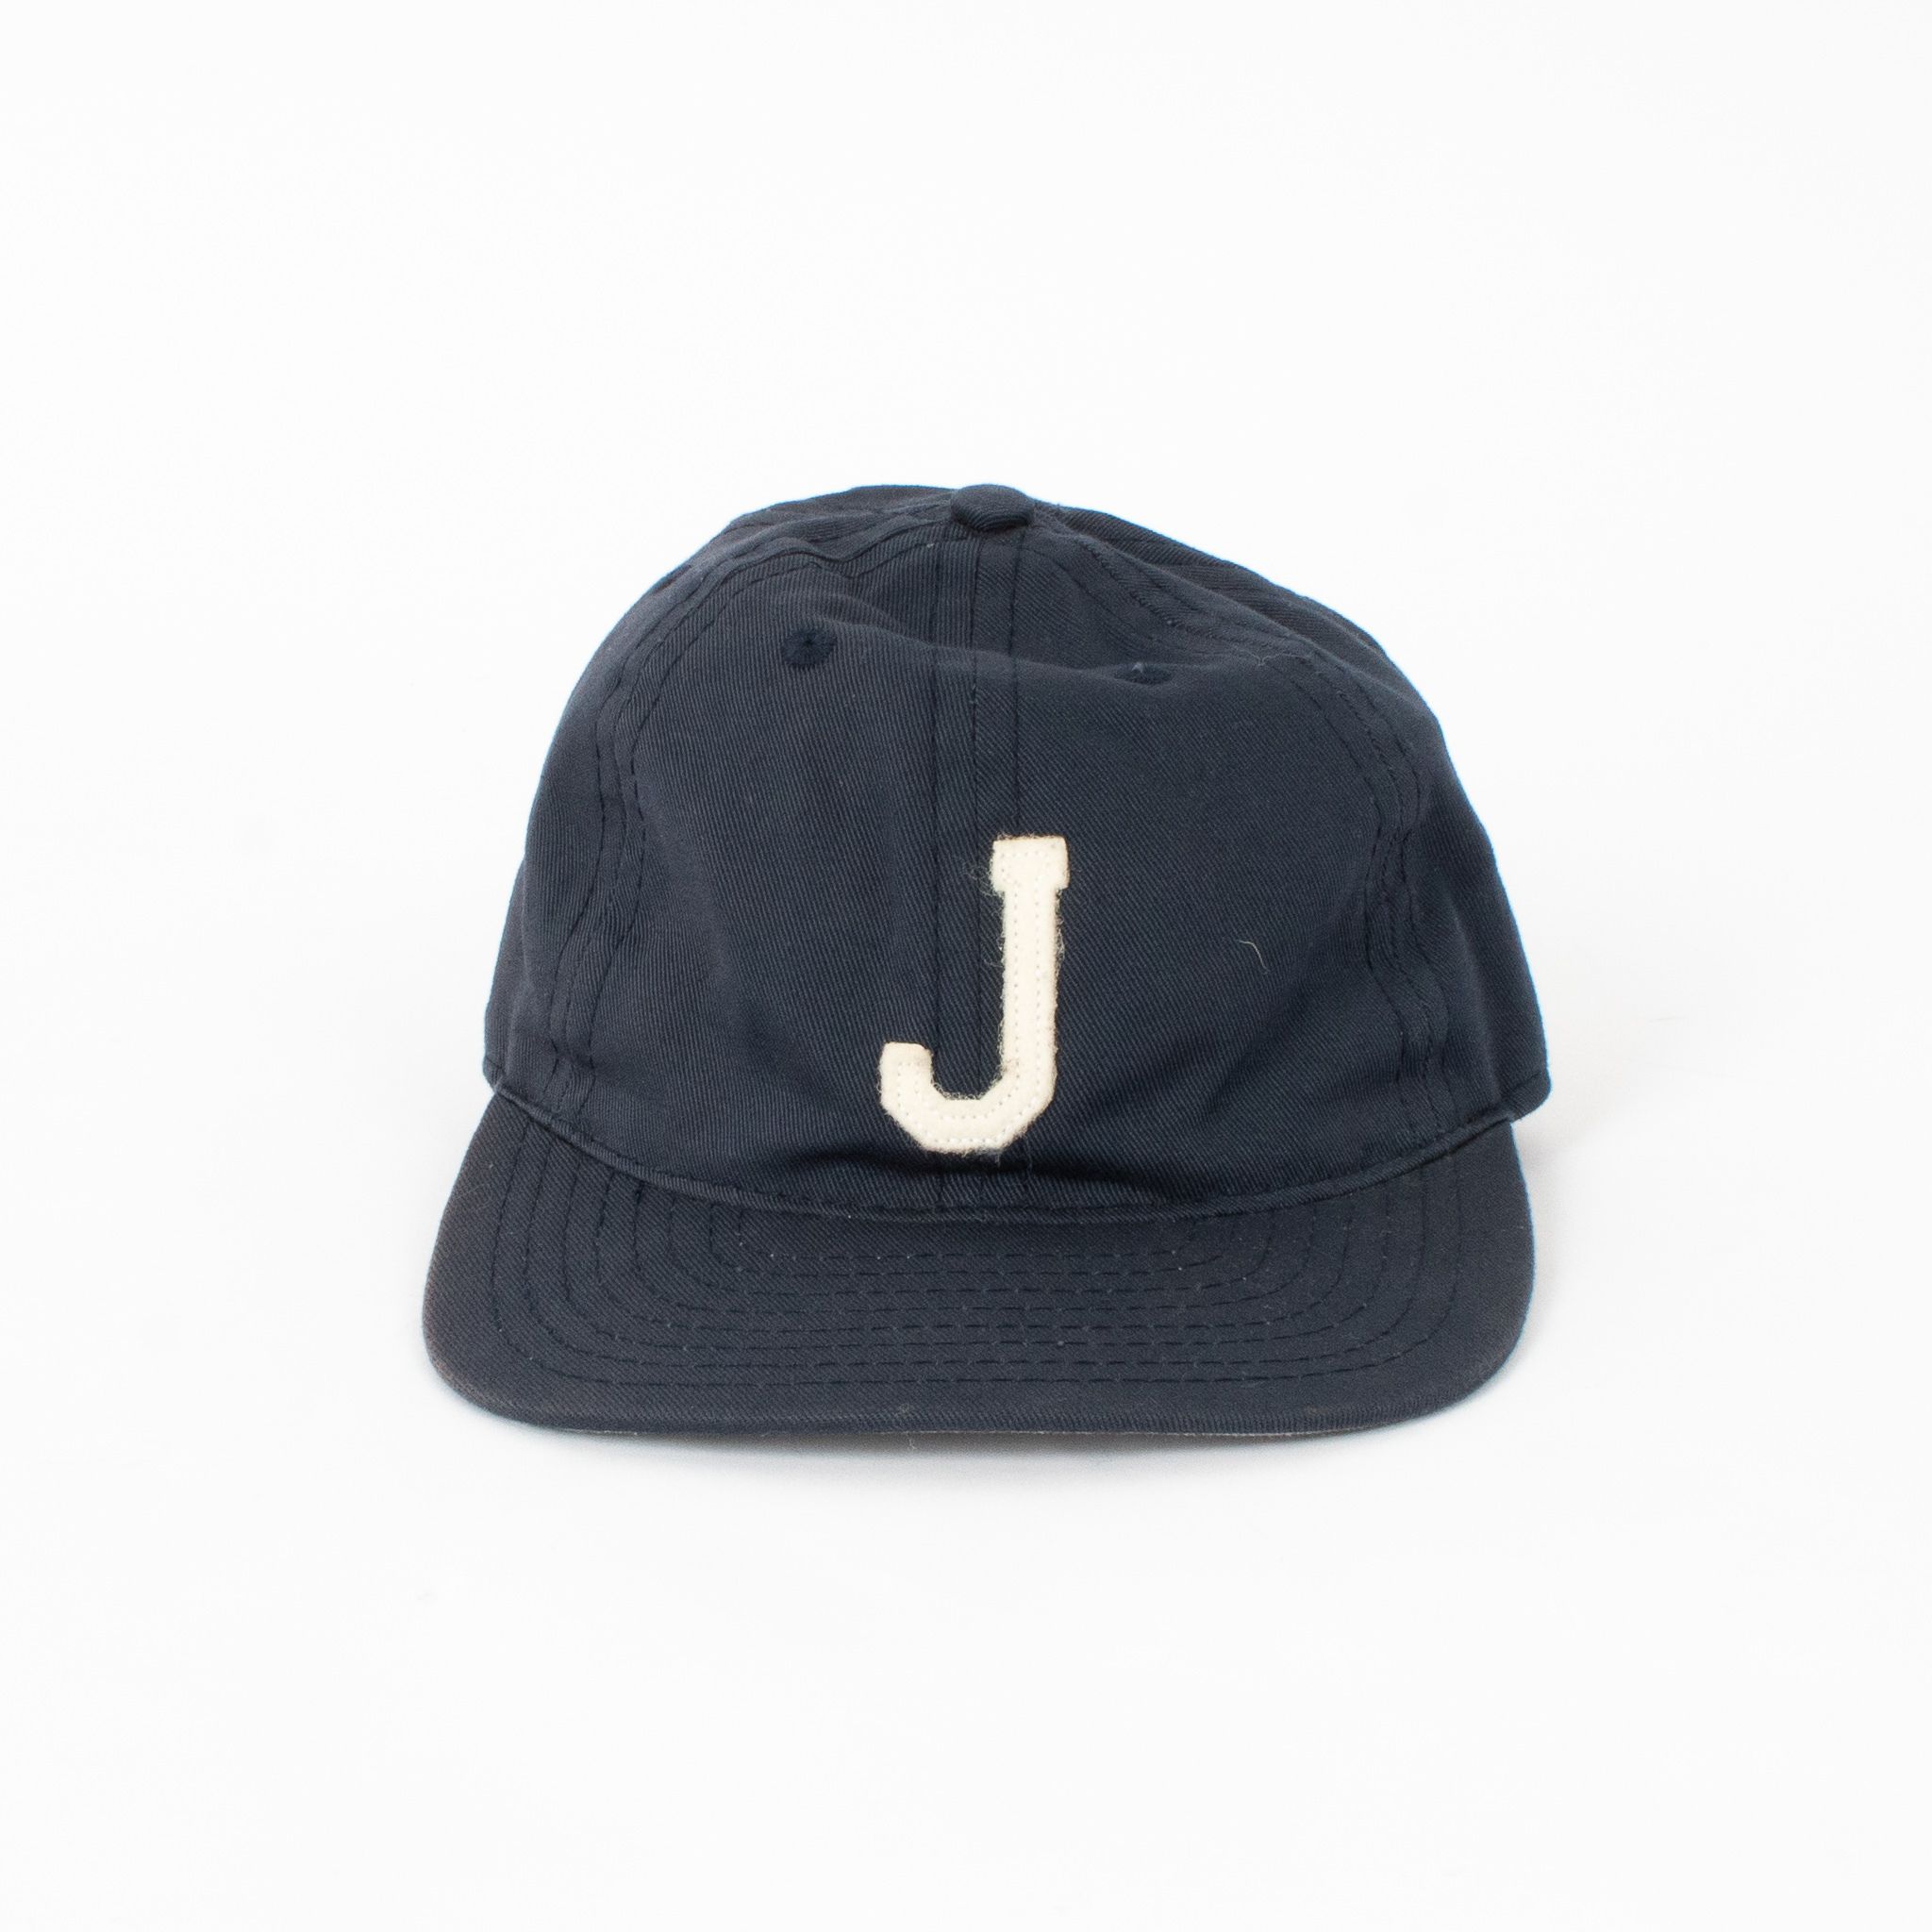 FairEnds JJJJound hat by Emily Oberg | Basic.Space